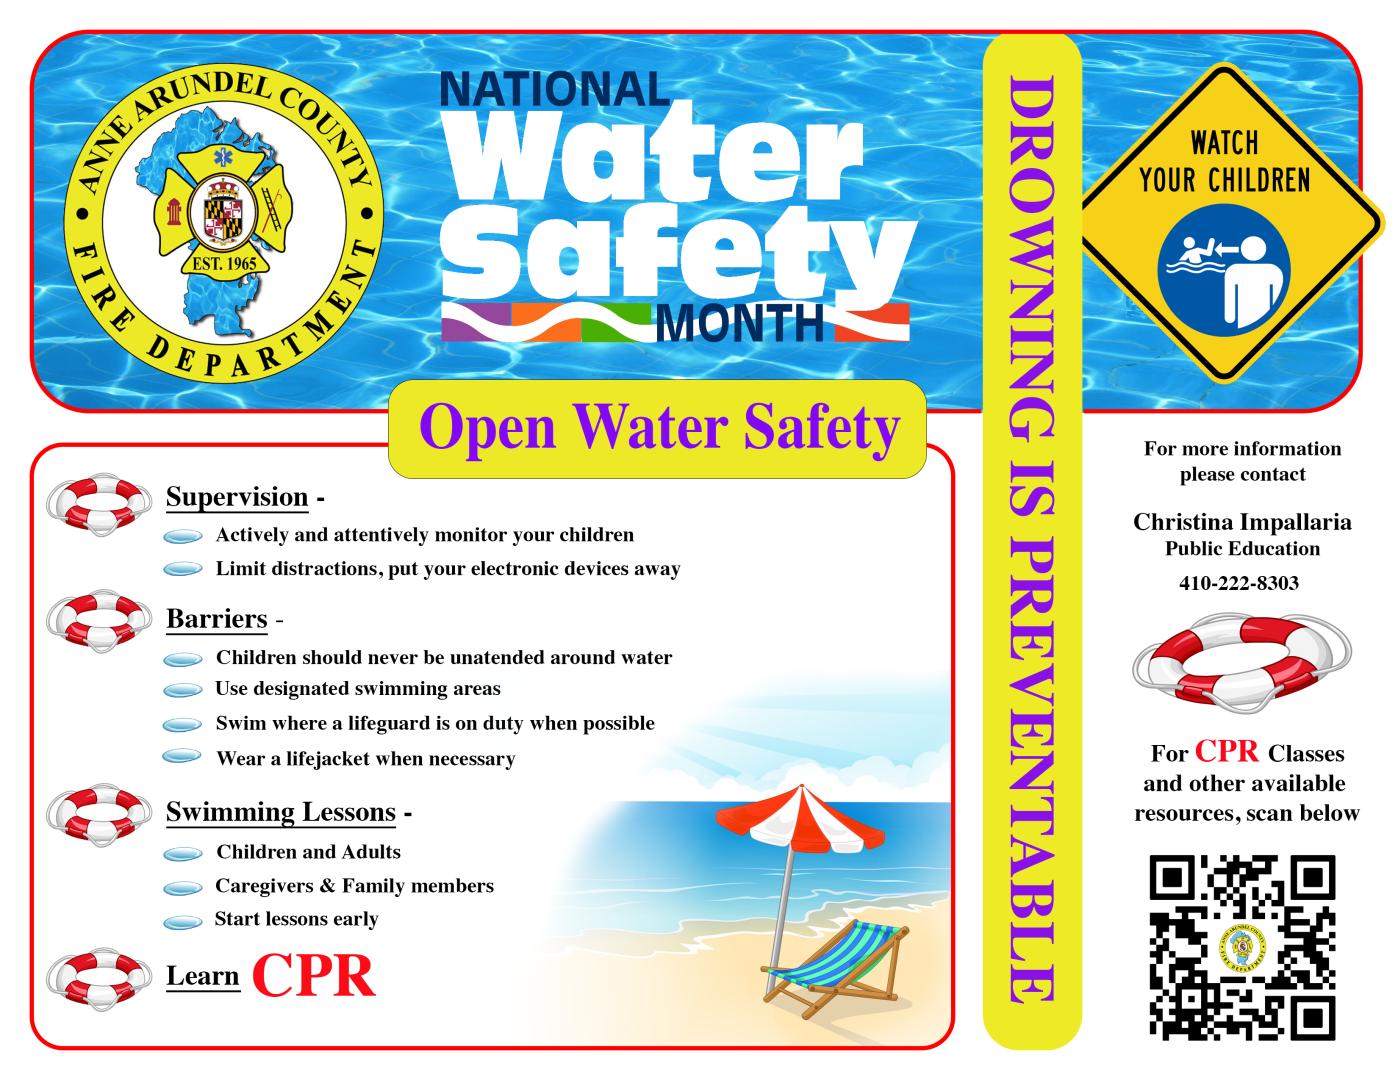 Water Safety Month Open Water